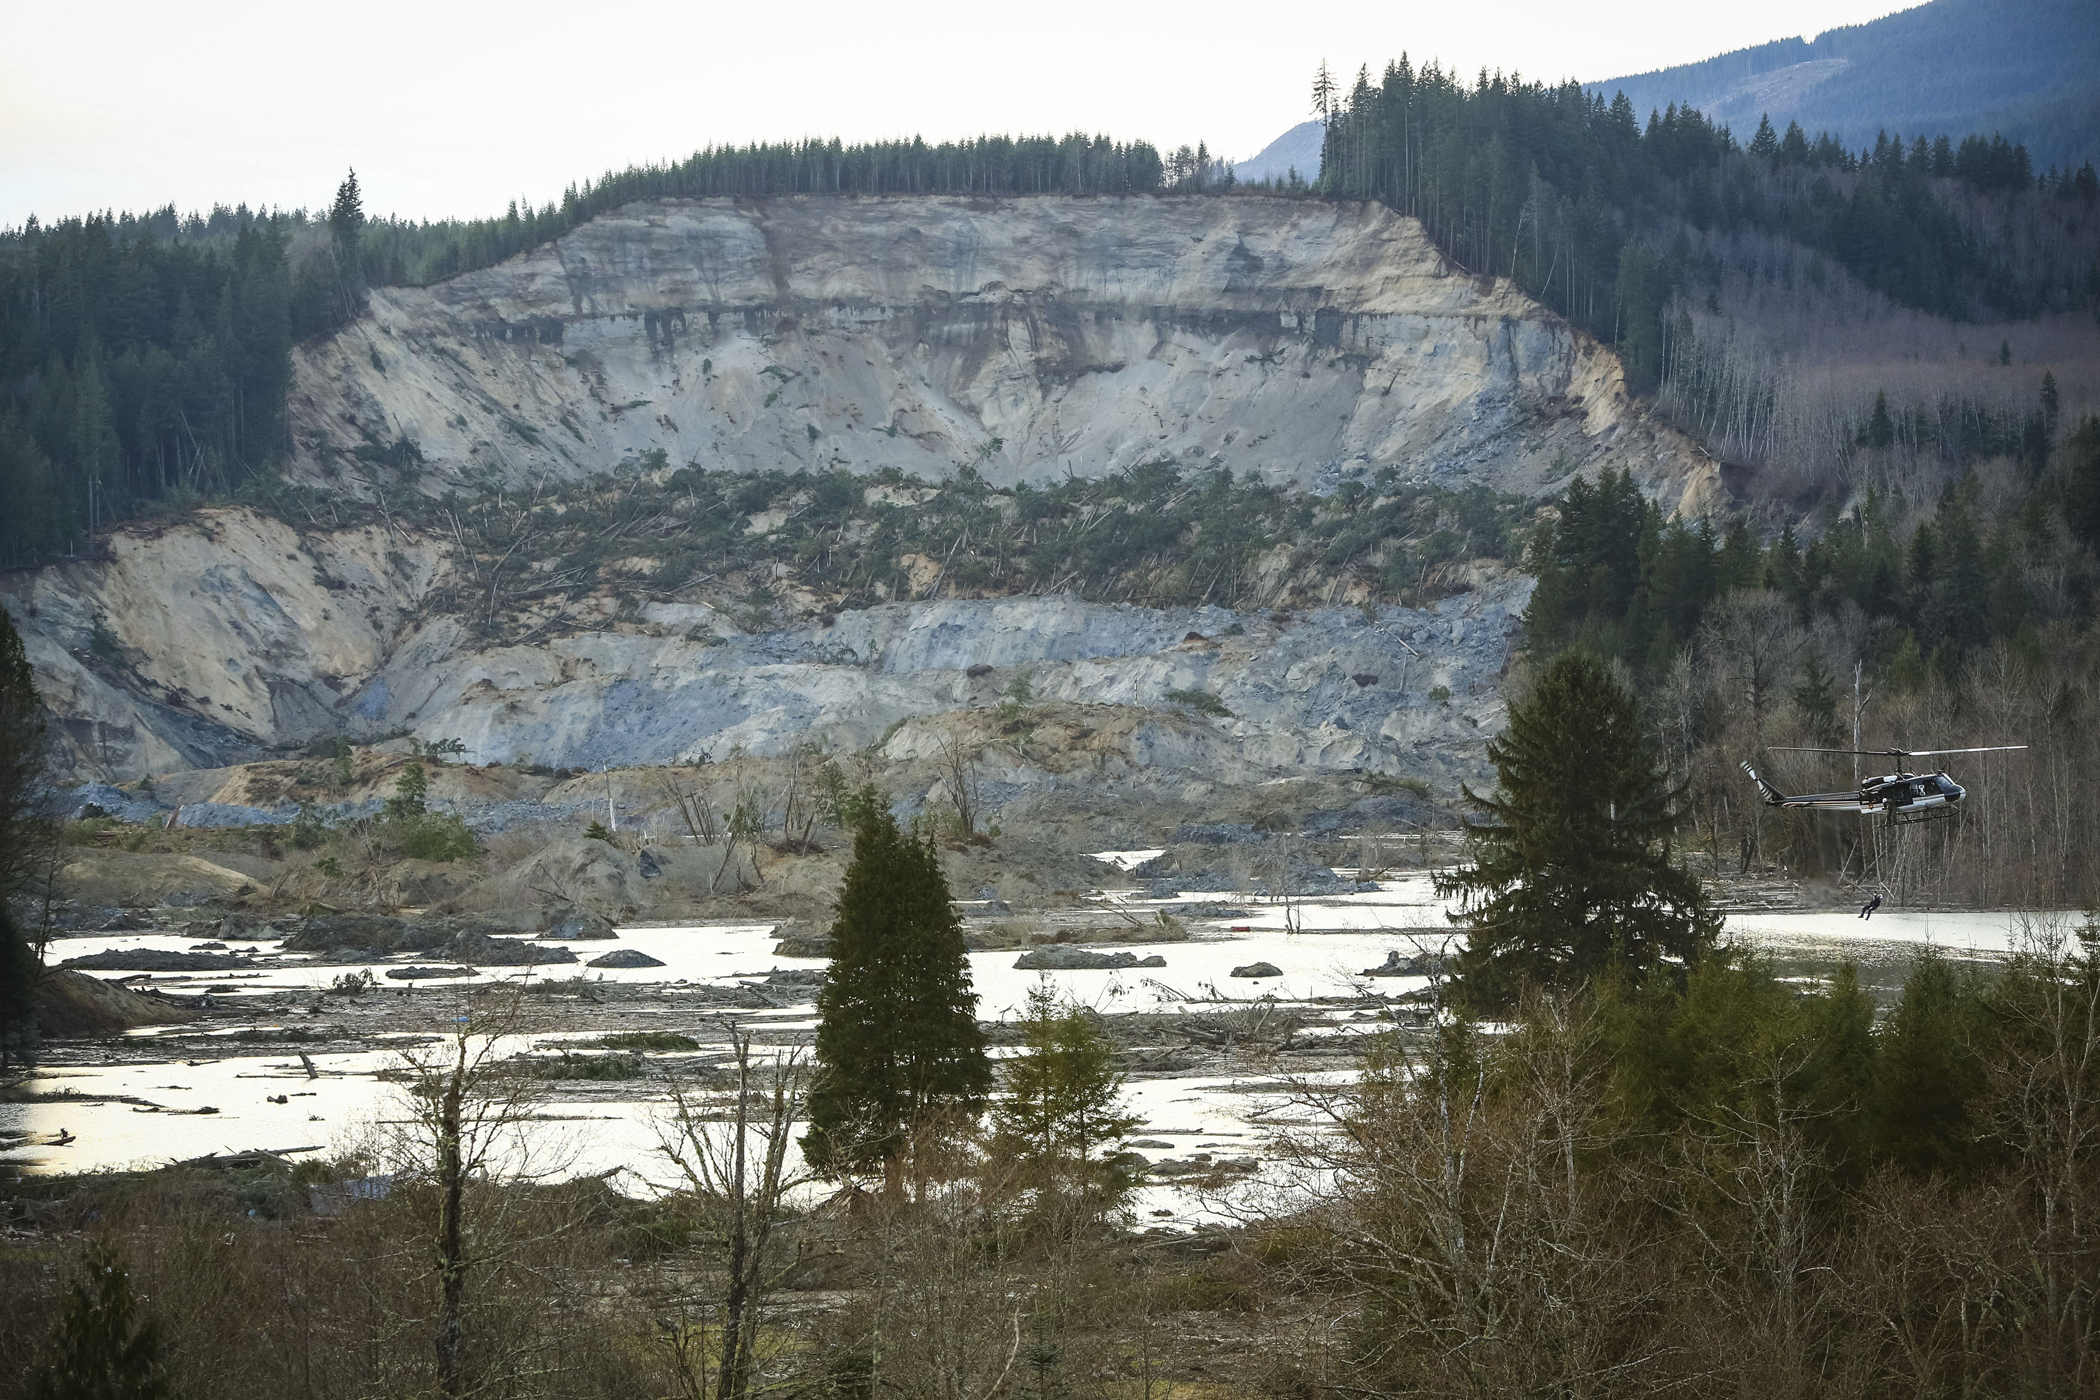 A rescue worker is lowered from a helicopter, right, near Oso, Wash, Monday, March 24, 2014.